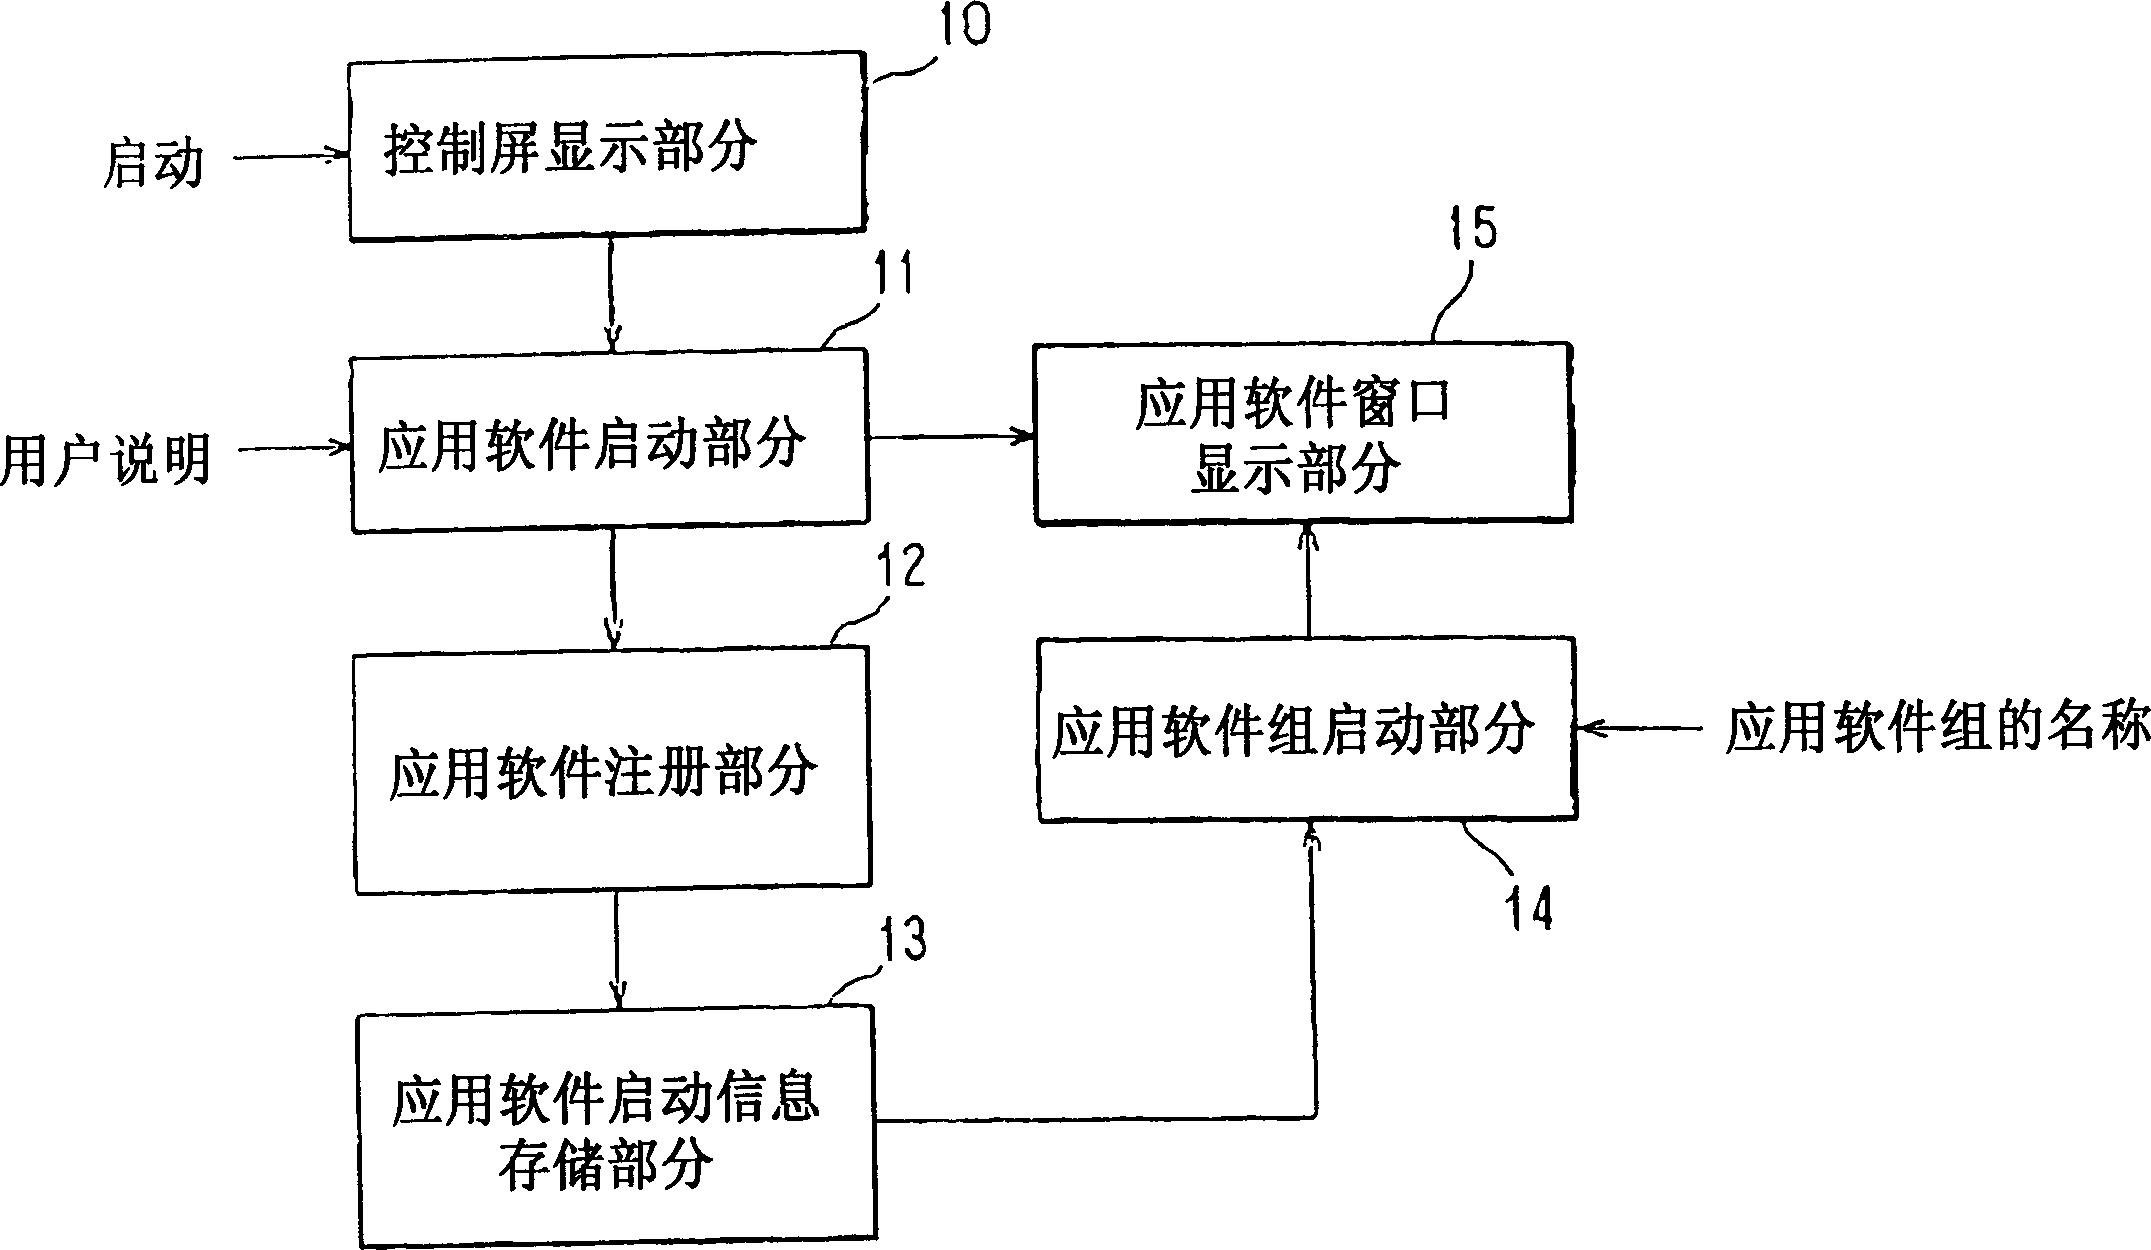 Apparatus and method for starting application software on a computer and multi-monitor computer using said apparatus and method